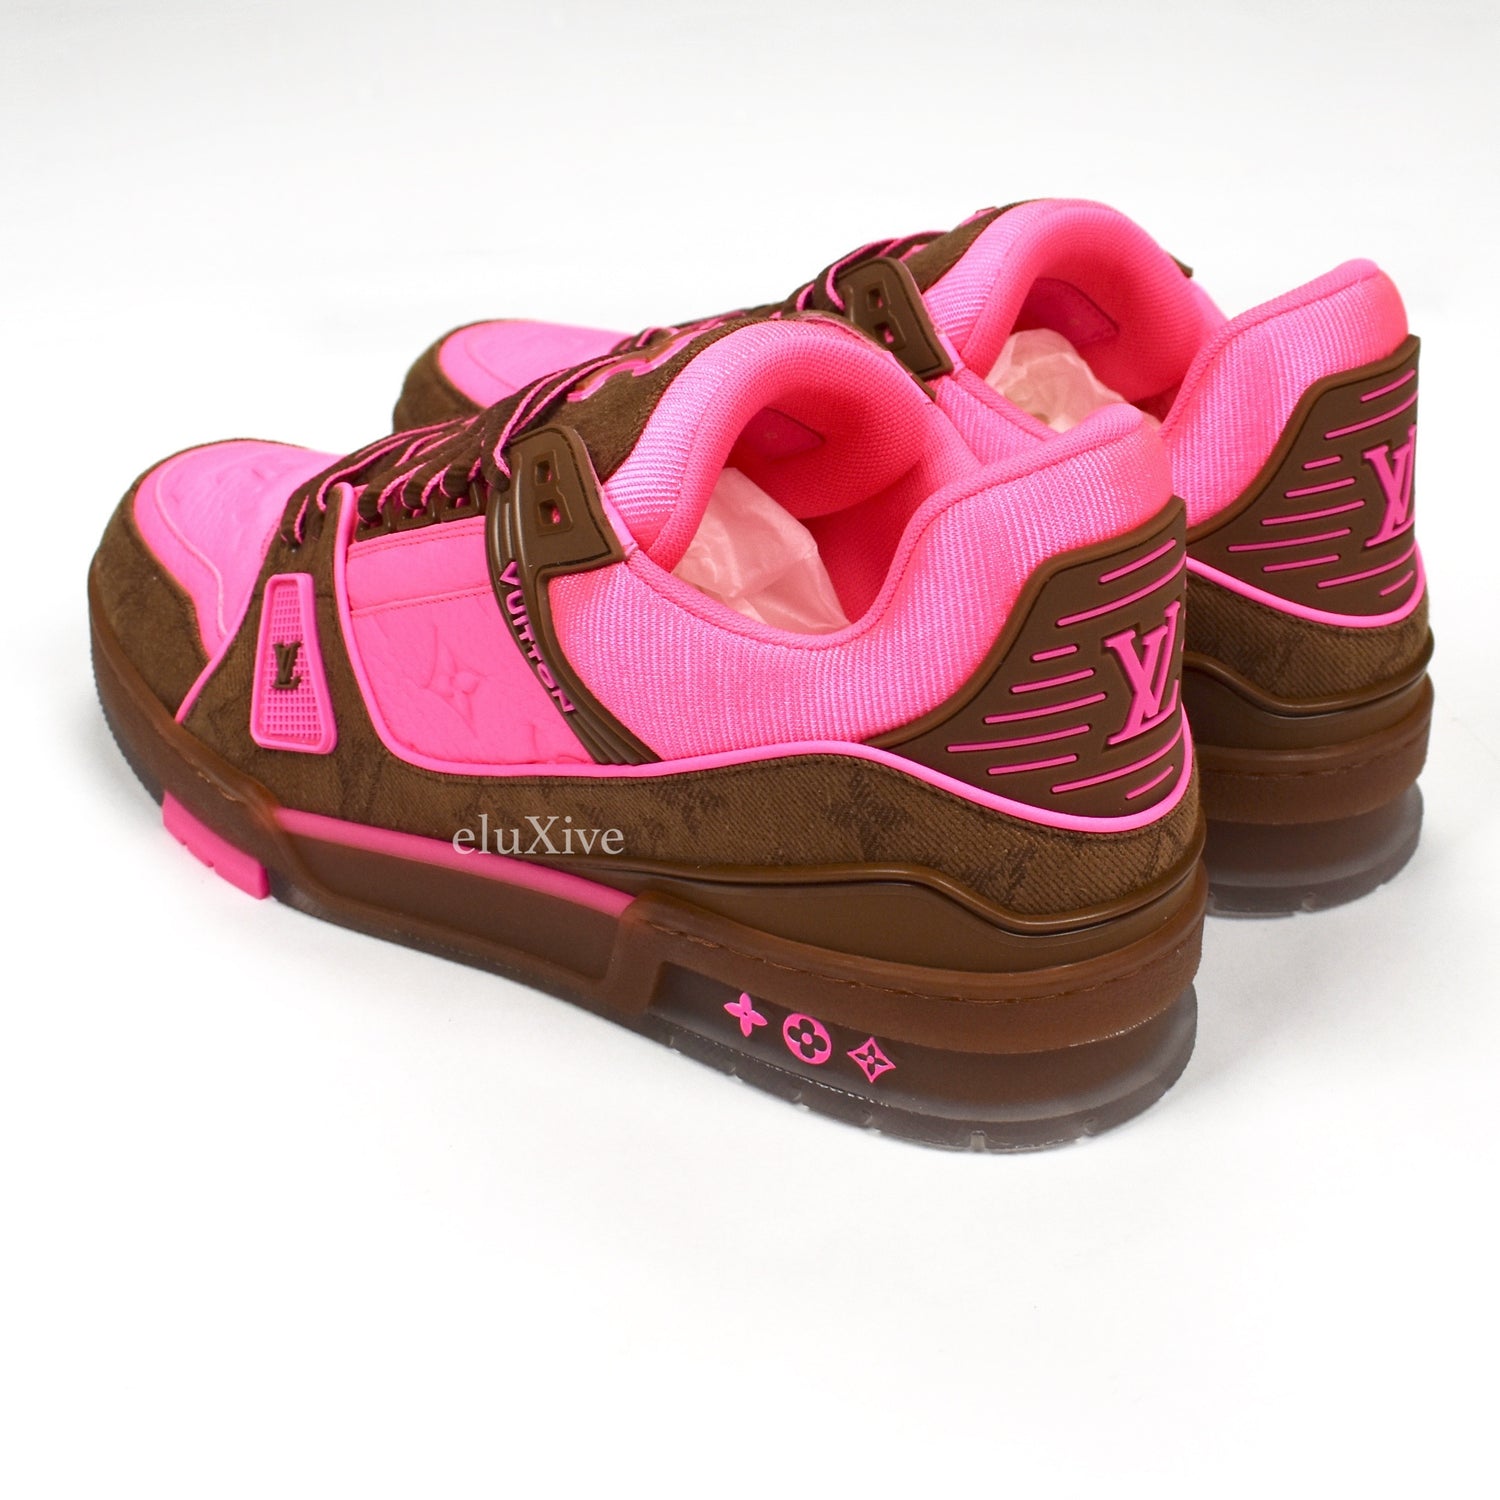 louis vuitton shoes trainer pink and brown｜TikTok Search